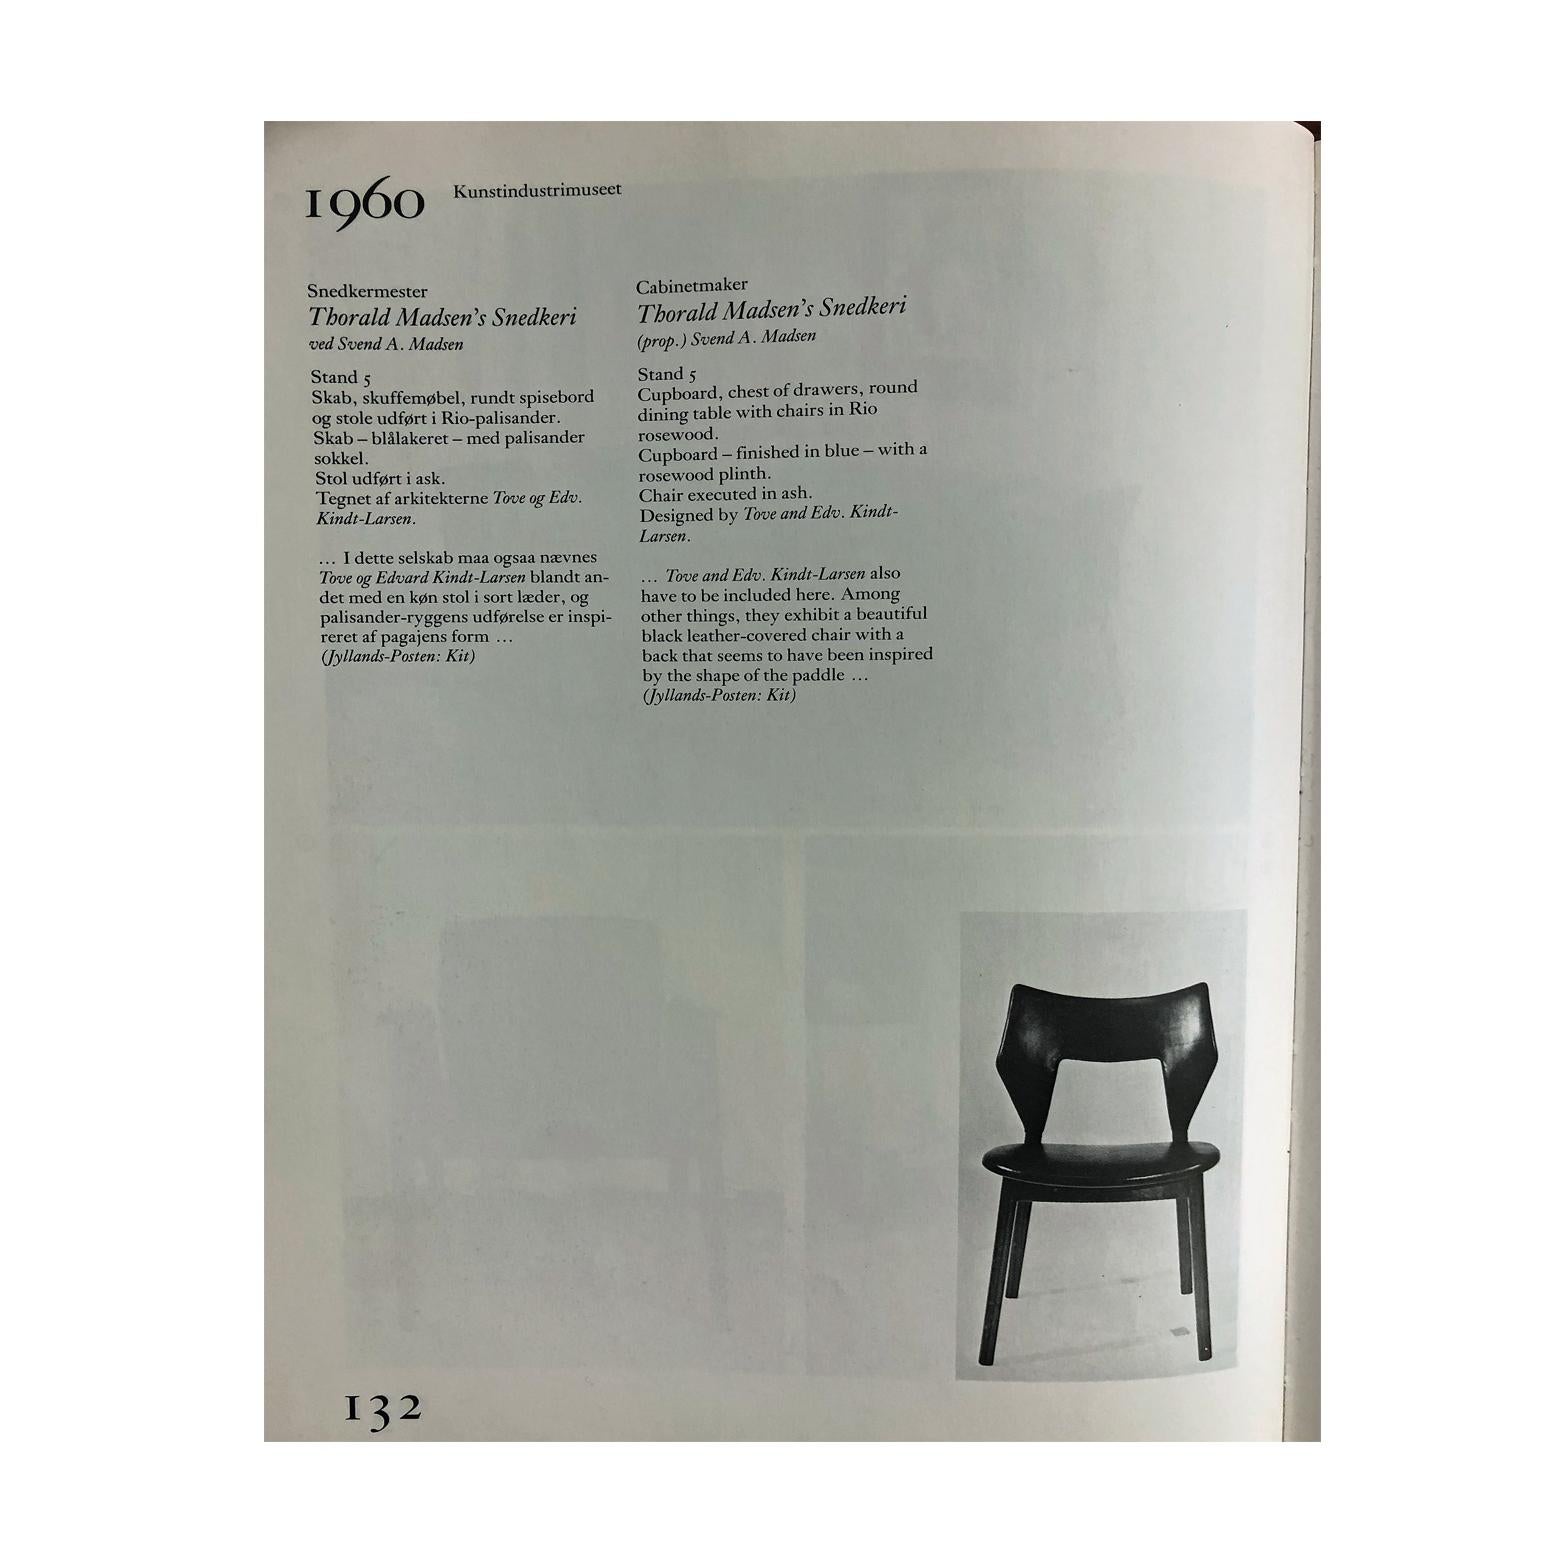 Teak Tove & Edvard Kind-Larsen Rare Six Dining Chairs for Thorald Madsen, 1960 For Sale